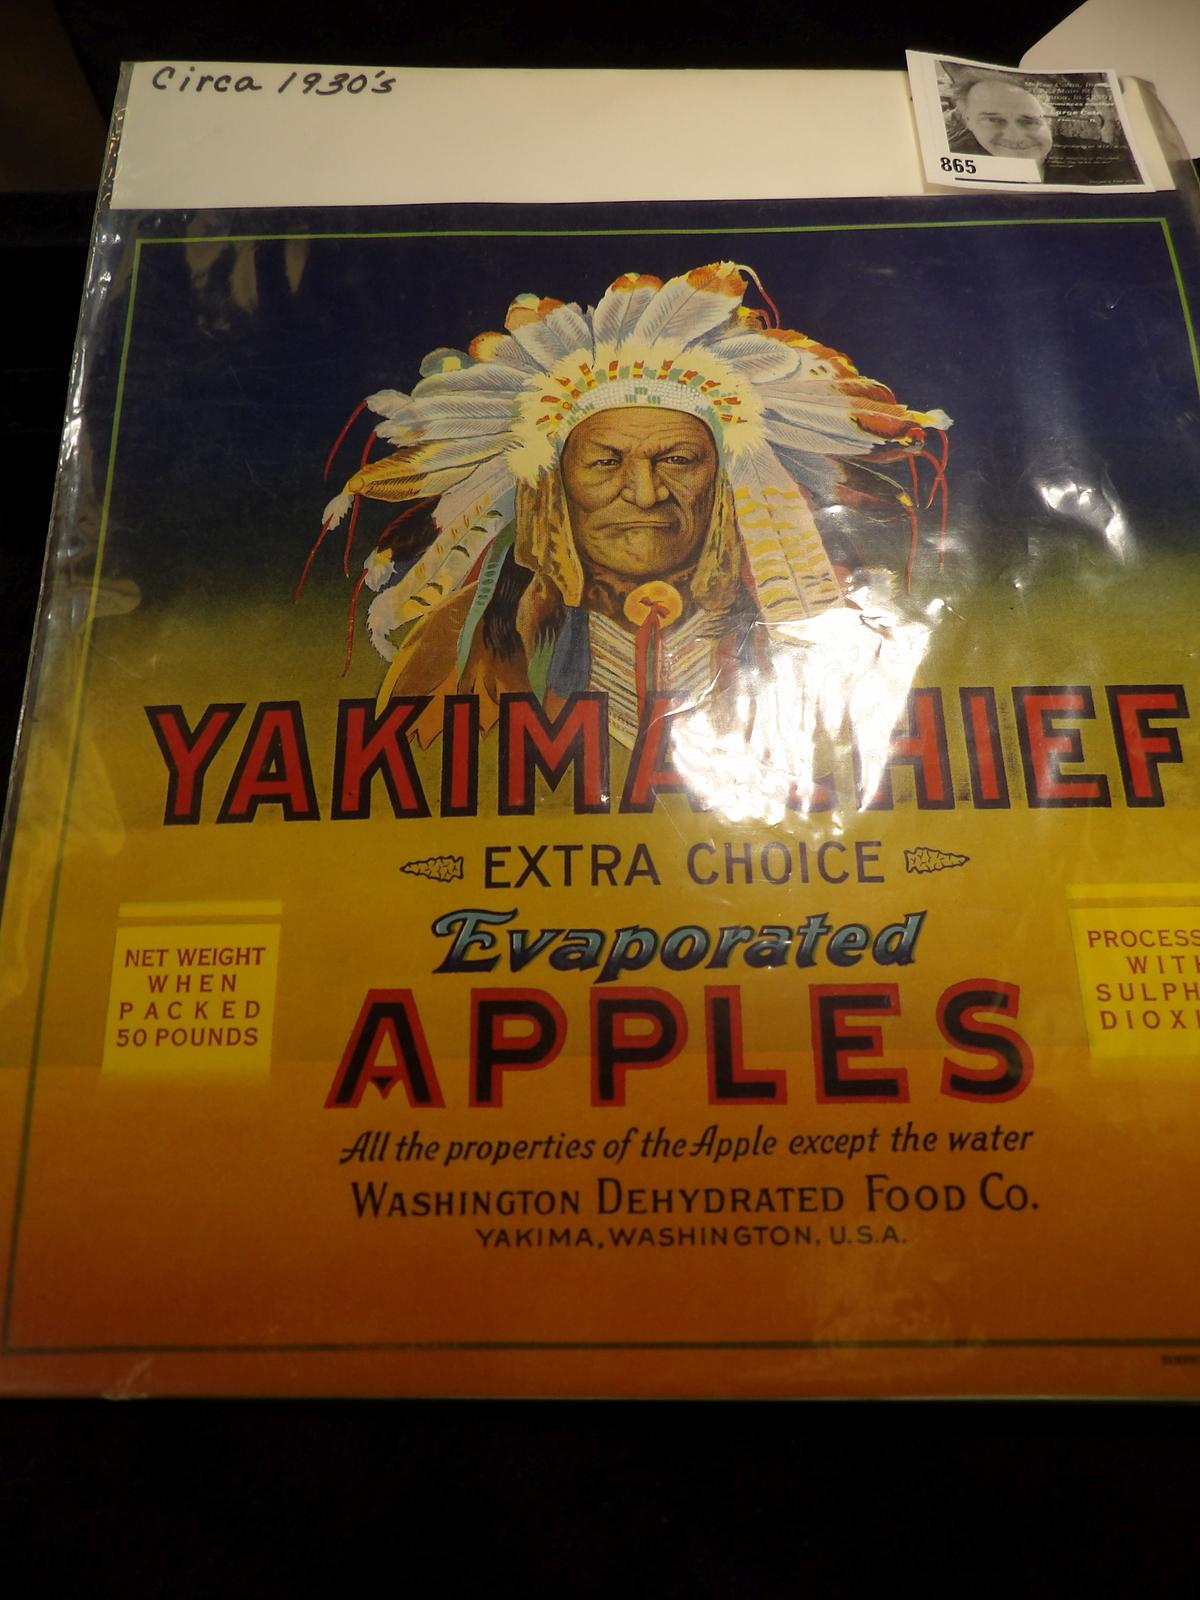 Circa 1930's Mint State Crate label for "Yakima Chief Extra Choice Evaporated Apples All the Propert